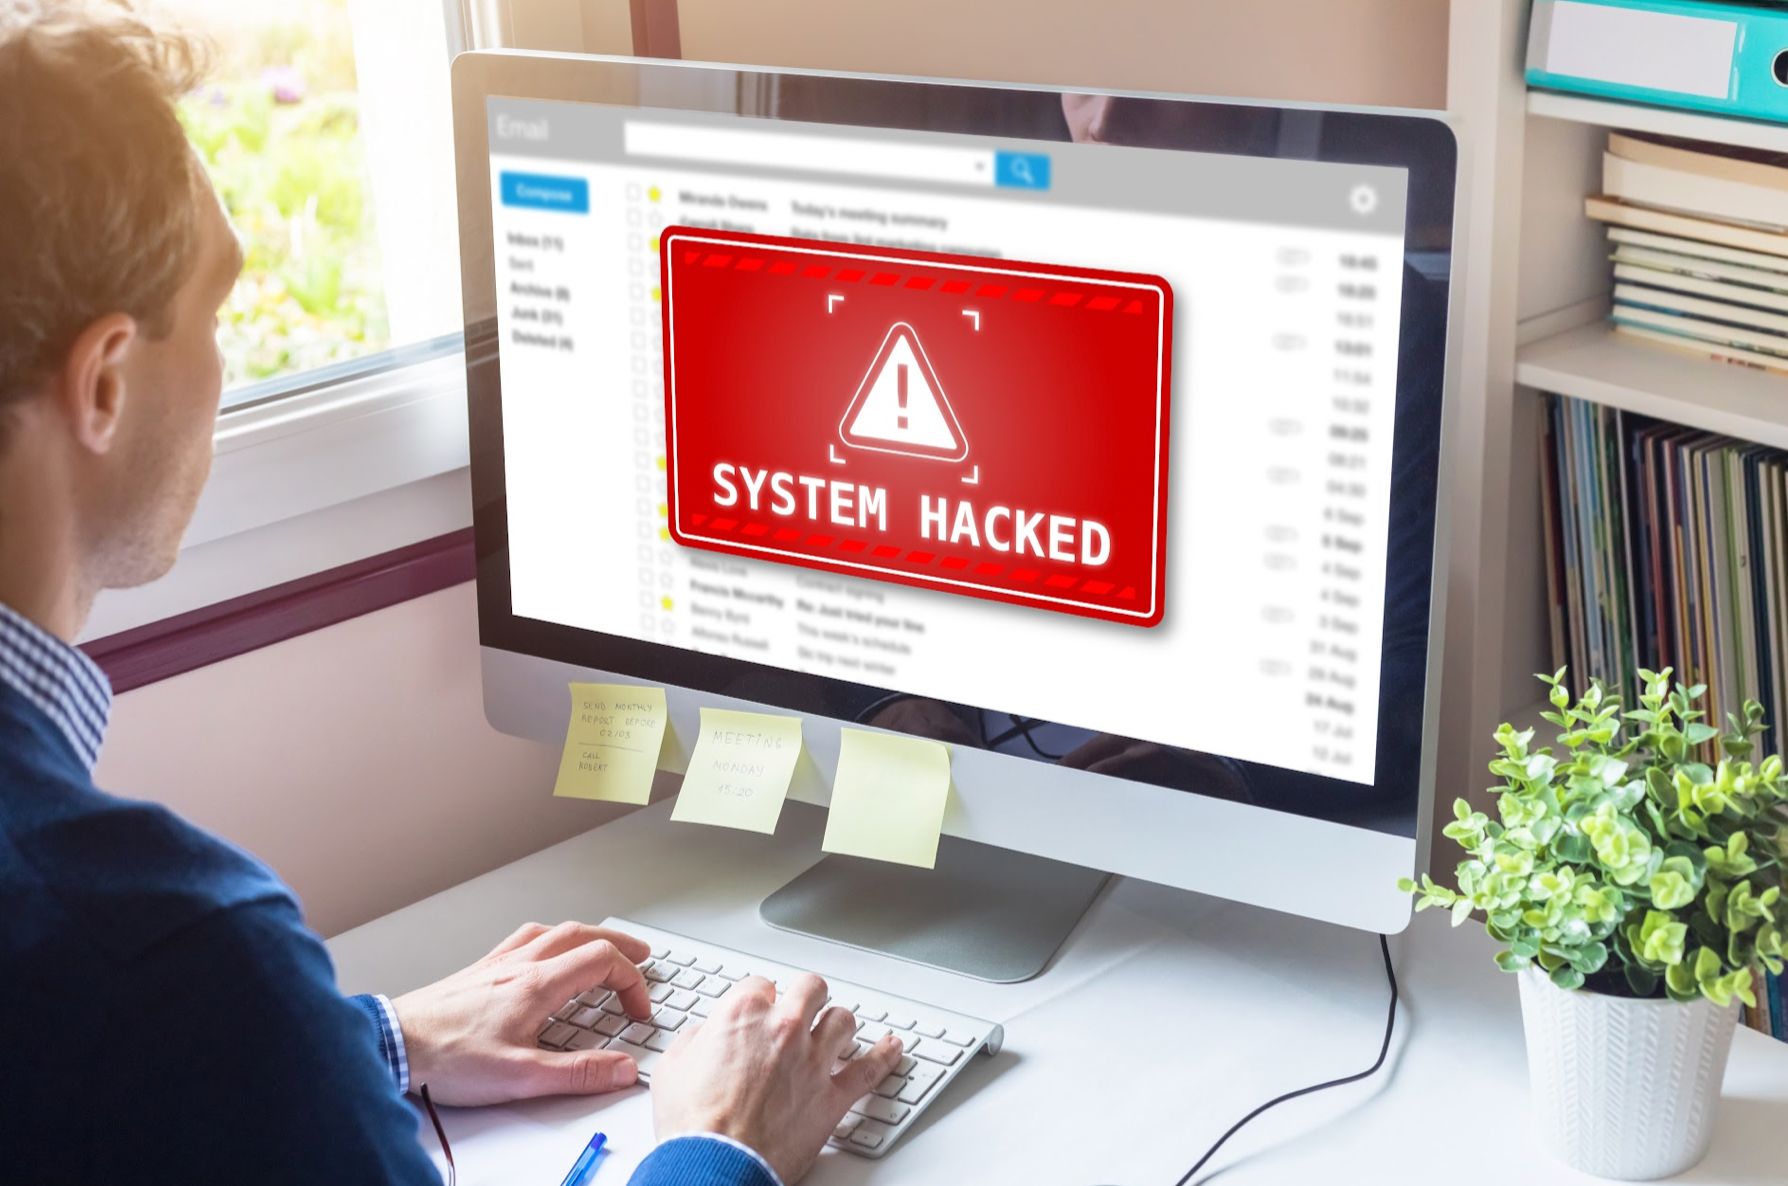 Online Safety. System hacked alert on a computer.